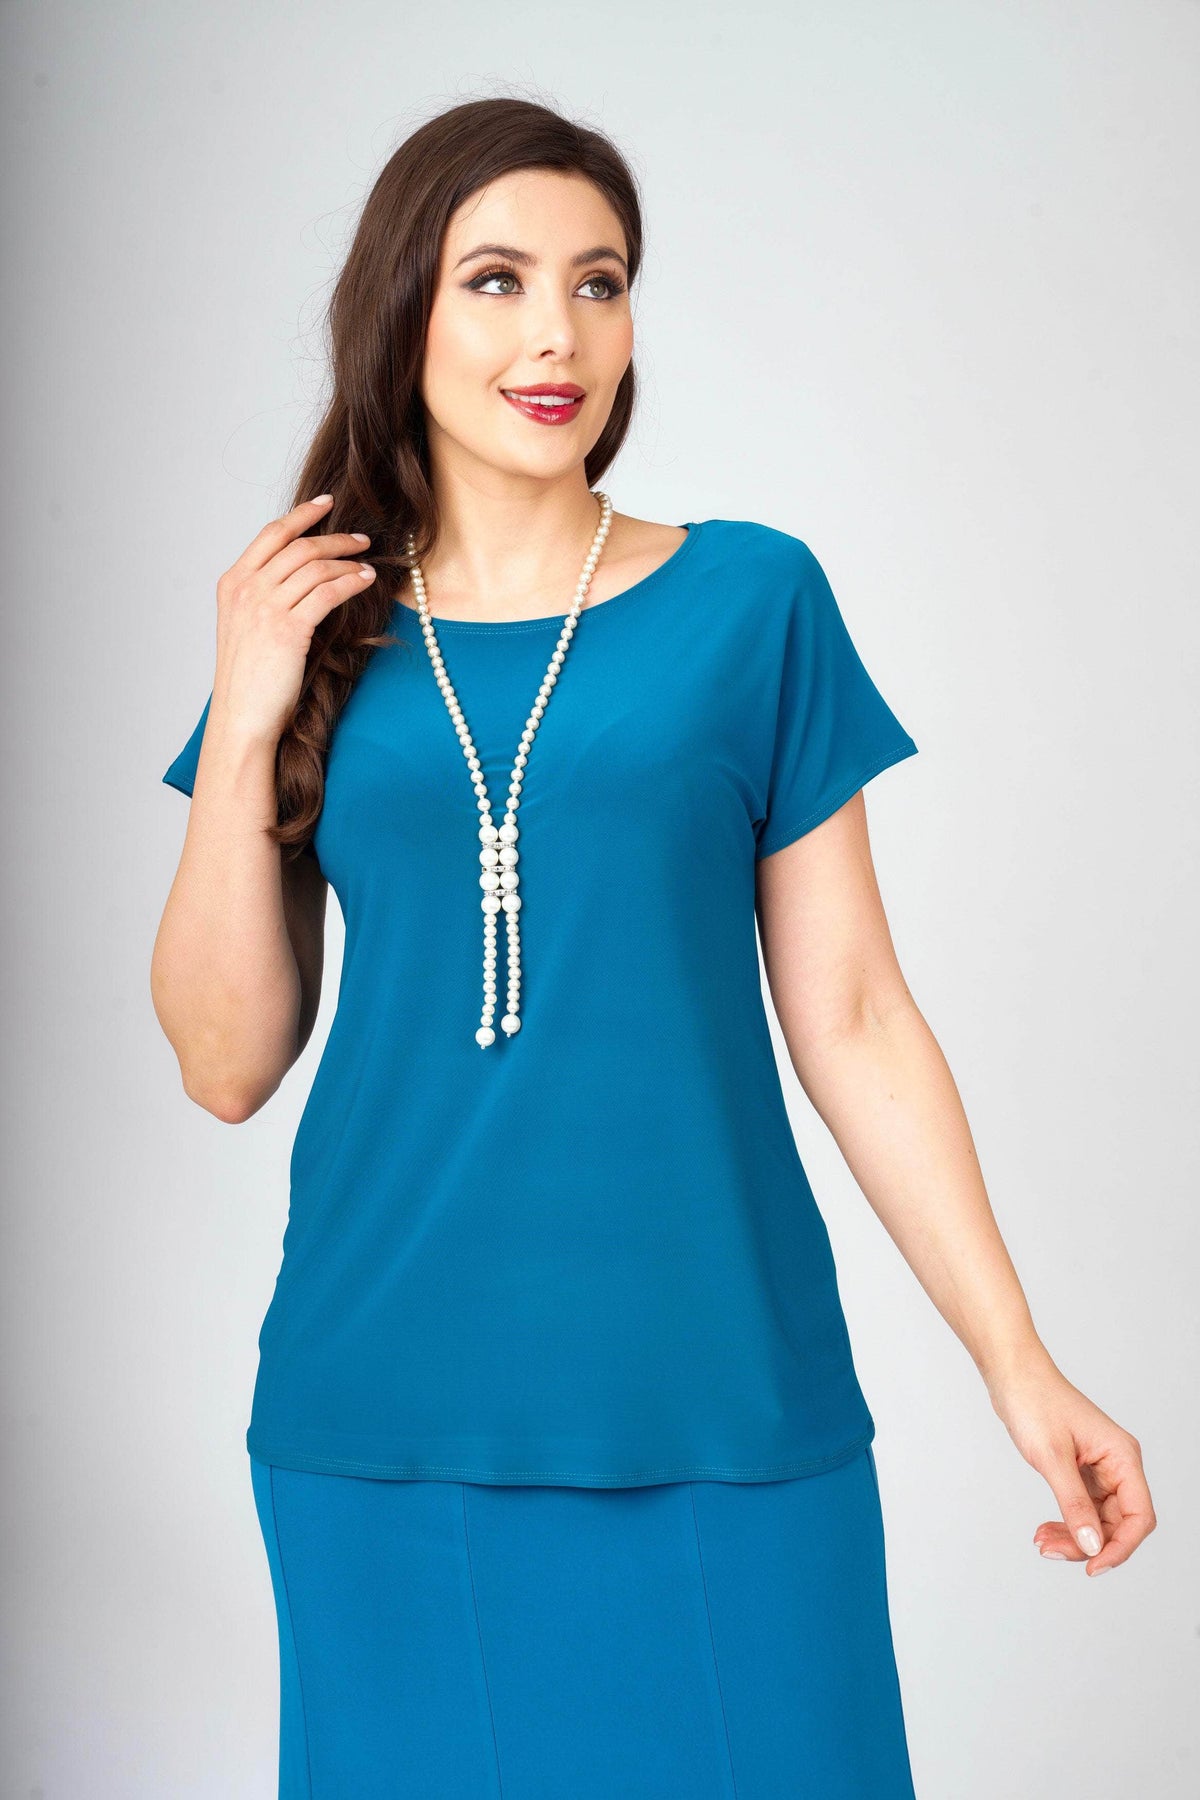 T1 Top Teal / UK: 12 - EU: 38 - US: S Essential Extended-Shoulder Top with Necklace